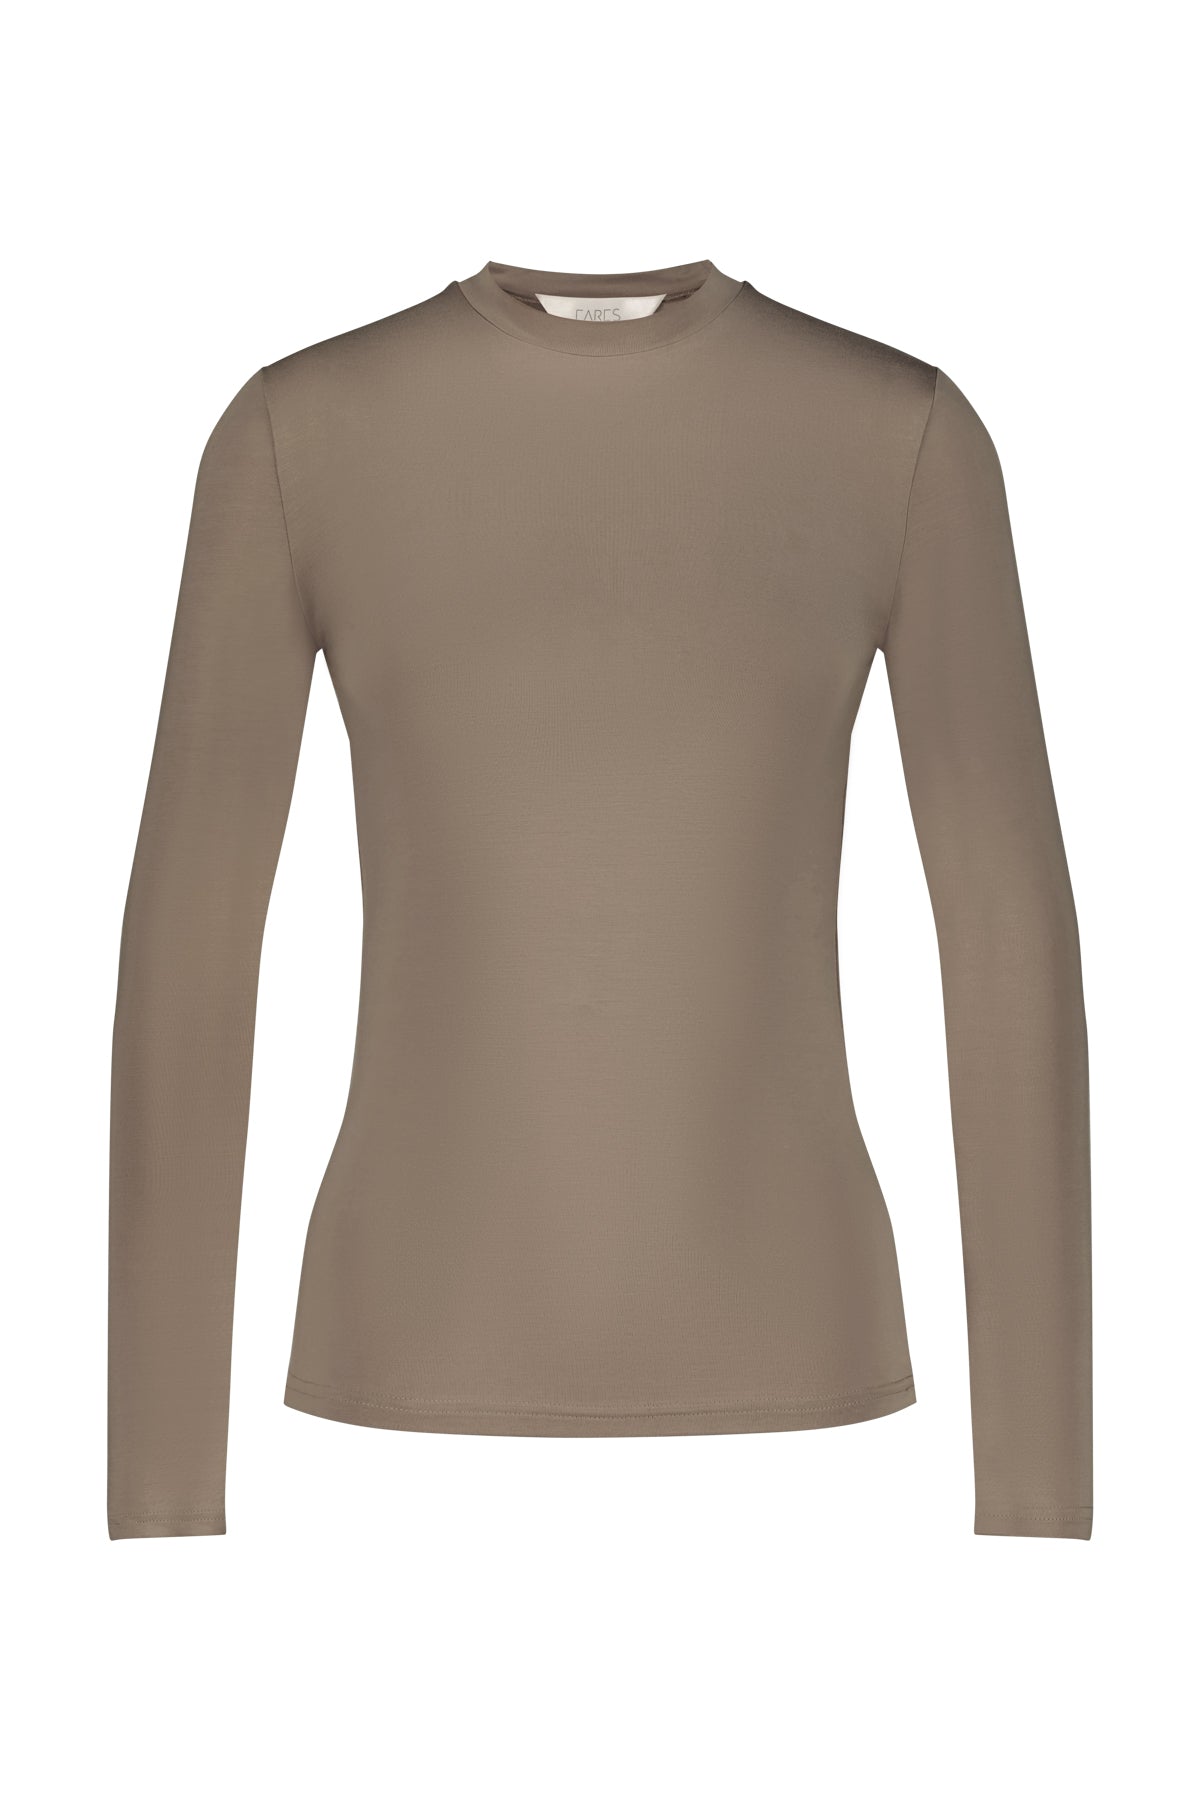 AE - Long Sleeve Layer - Taupe